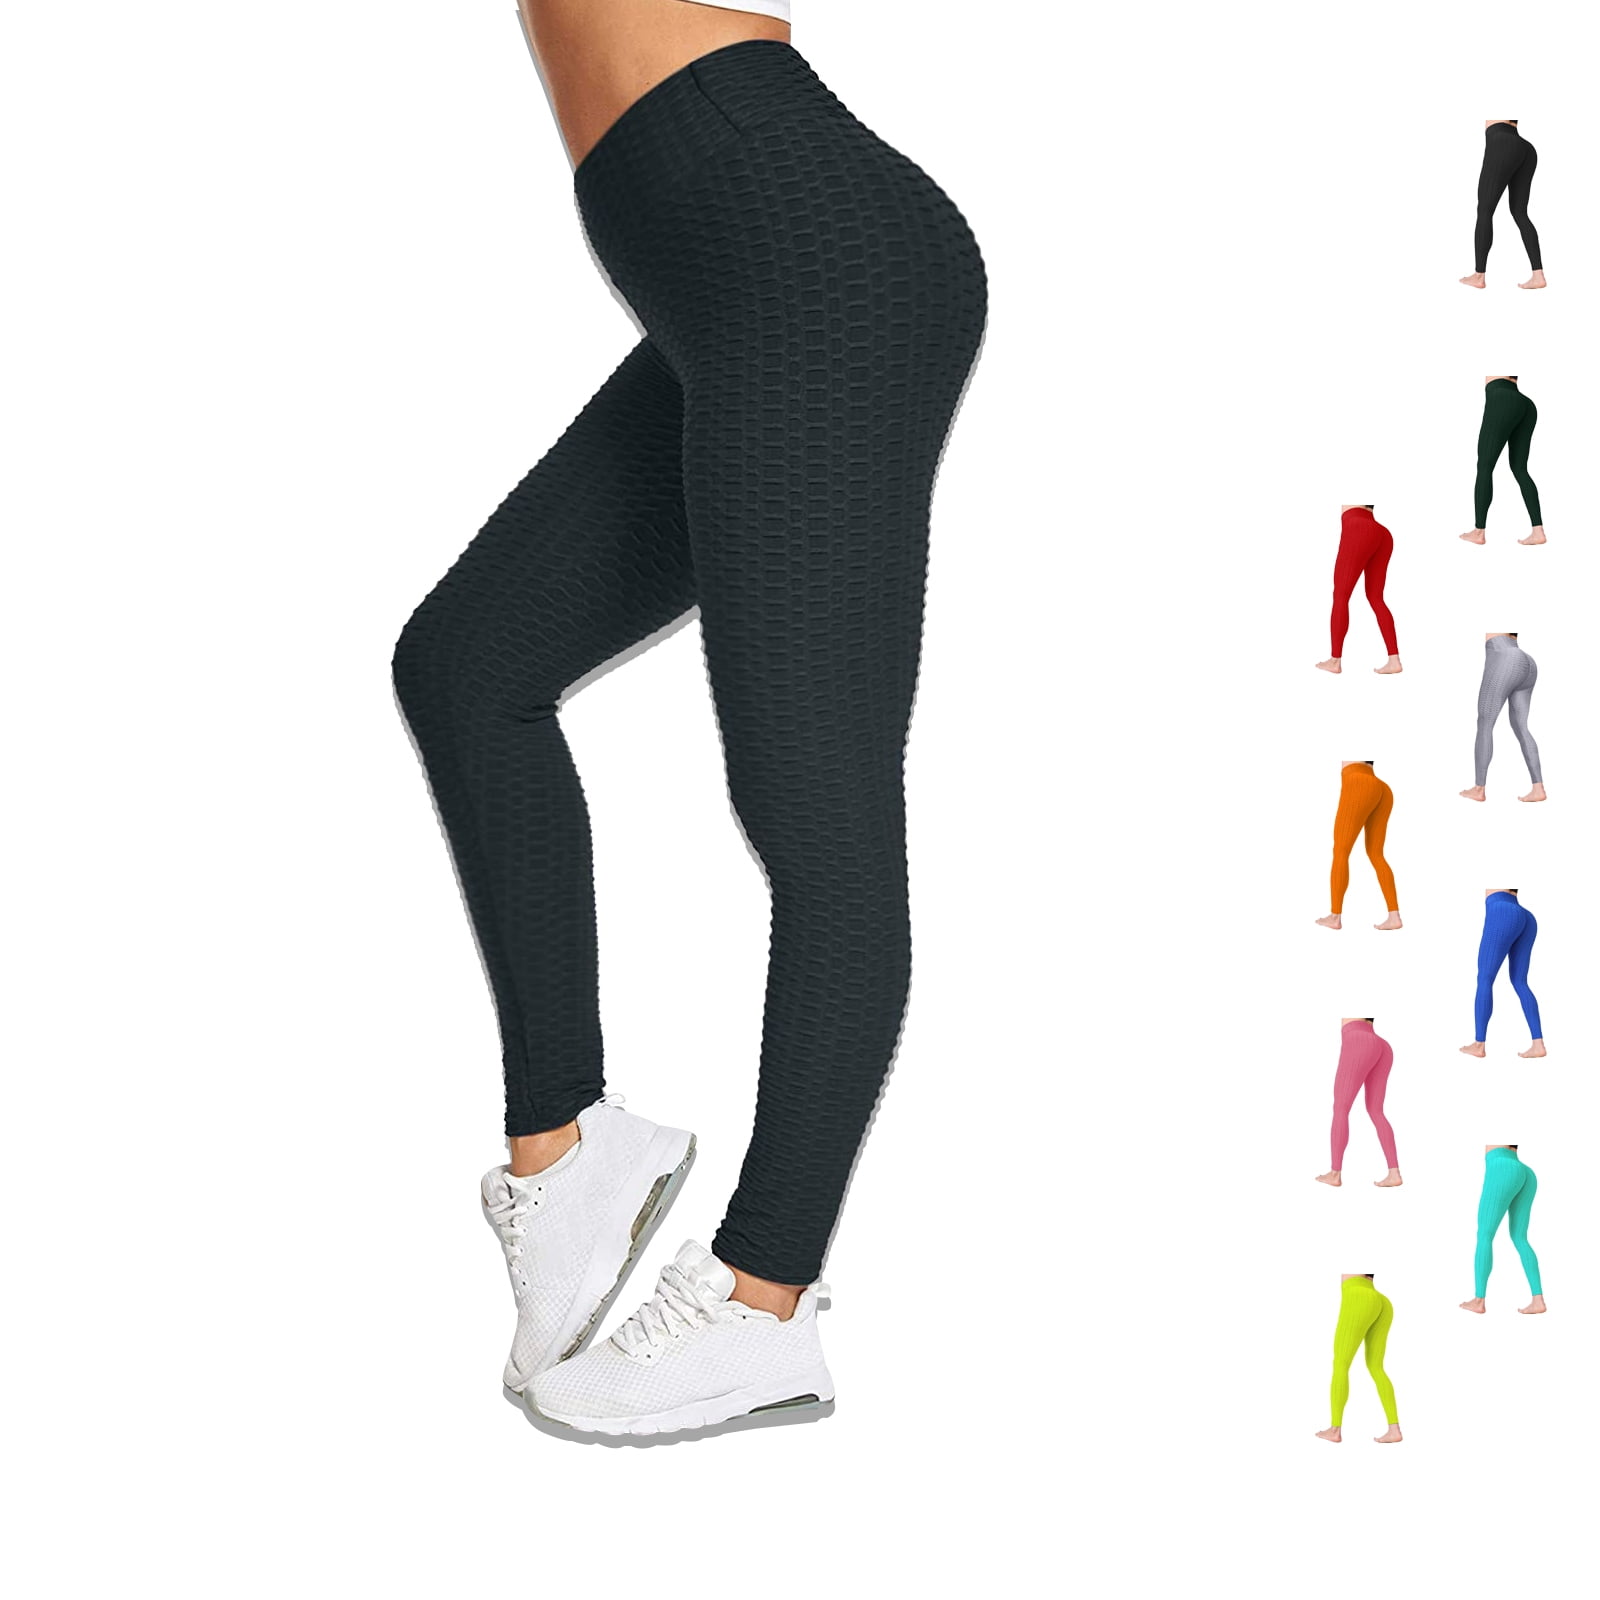 Plus Size Seamless Fitness Legging Tiktok With Bubble Butt And High Waist  For Women Slimming And Push Up 211221 From Mu04, $10.76